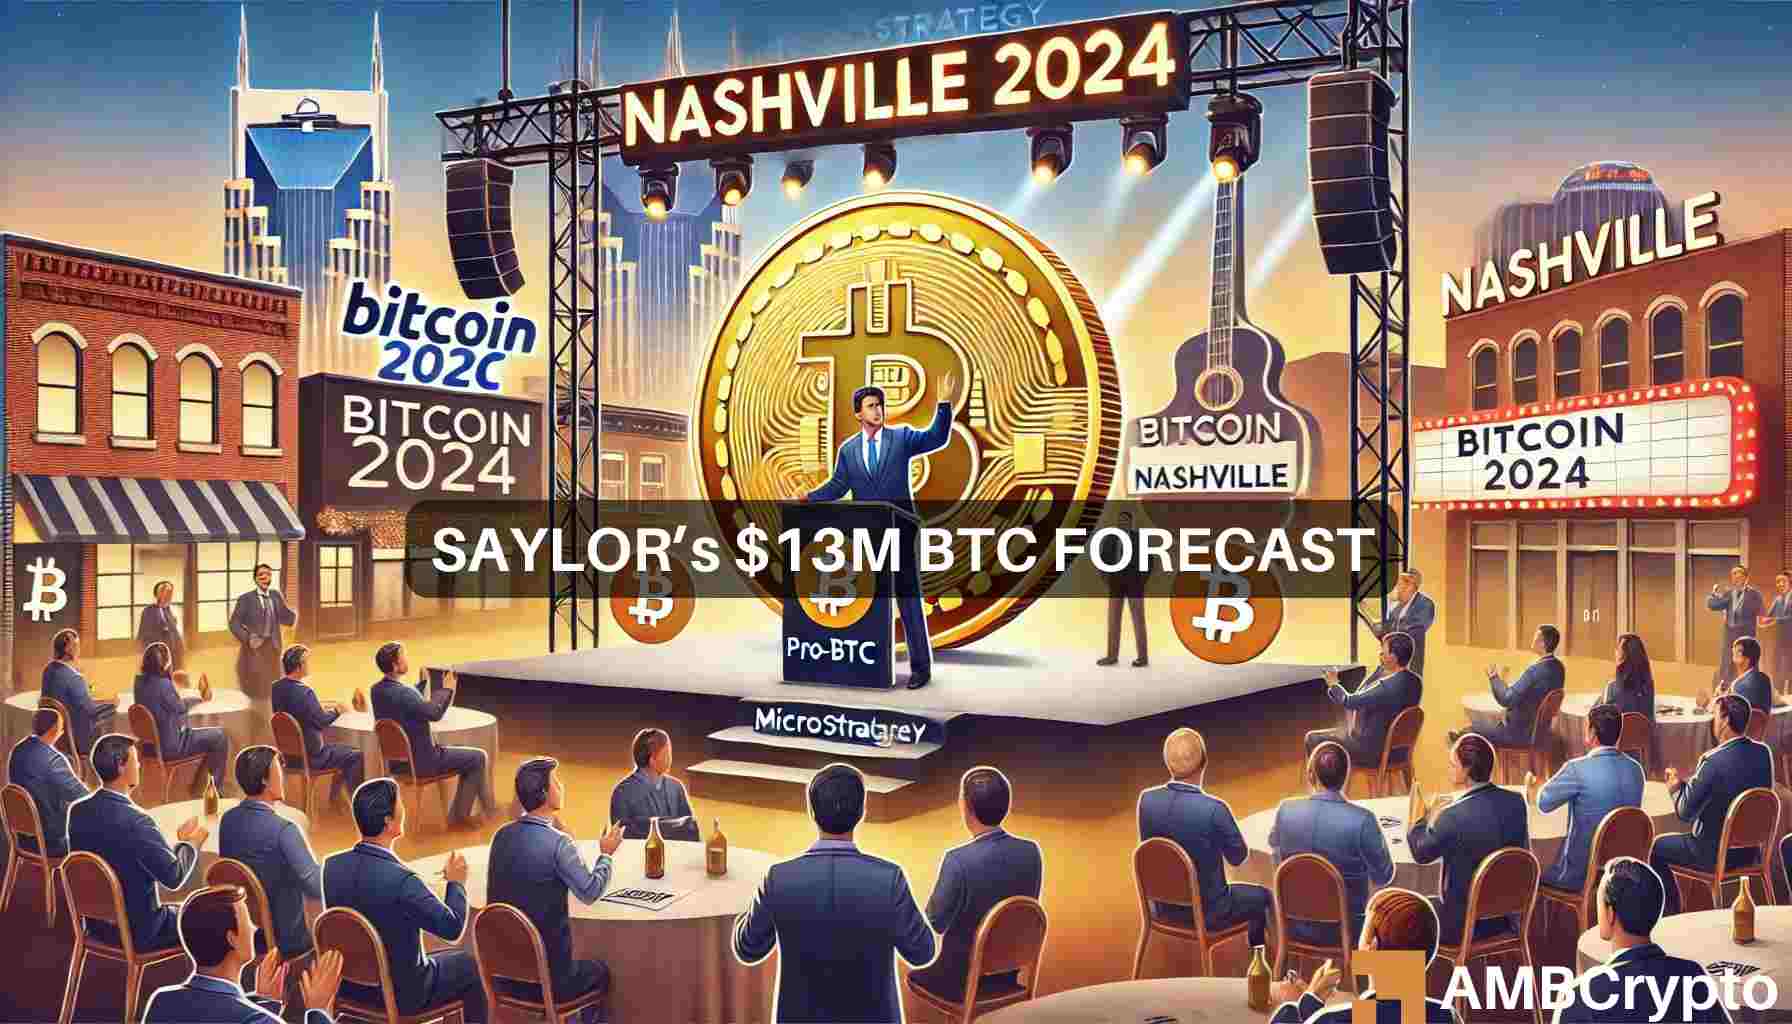 $3M or $49M – Michael Saylor’s Bitcoin projections for 2045!